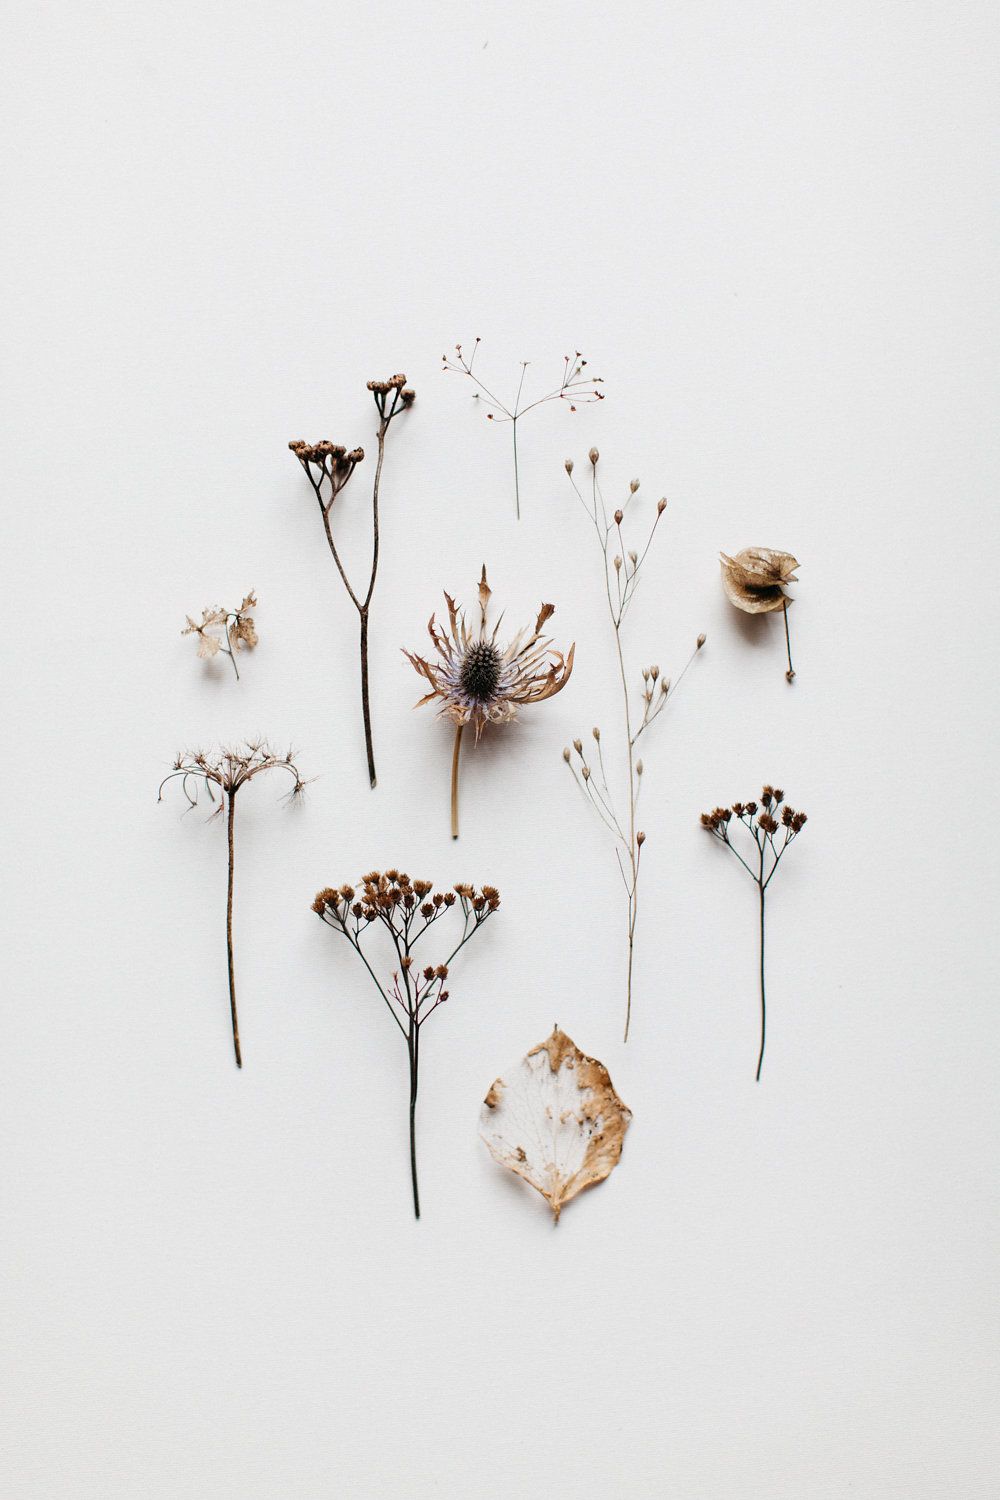 Flower aesthetic, Dried flowers, Flat lay photography